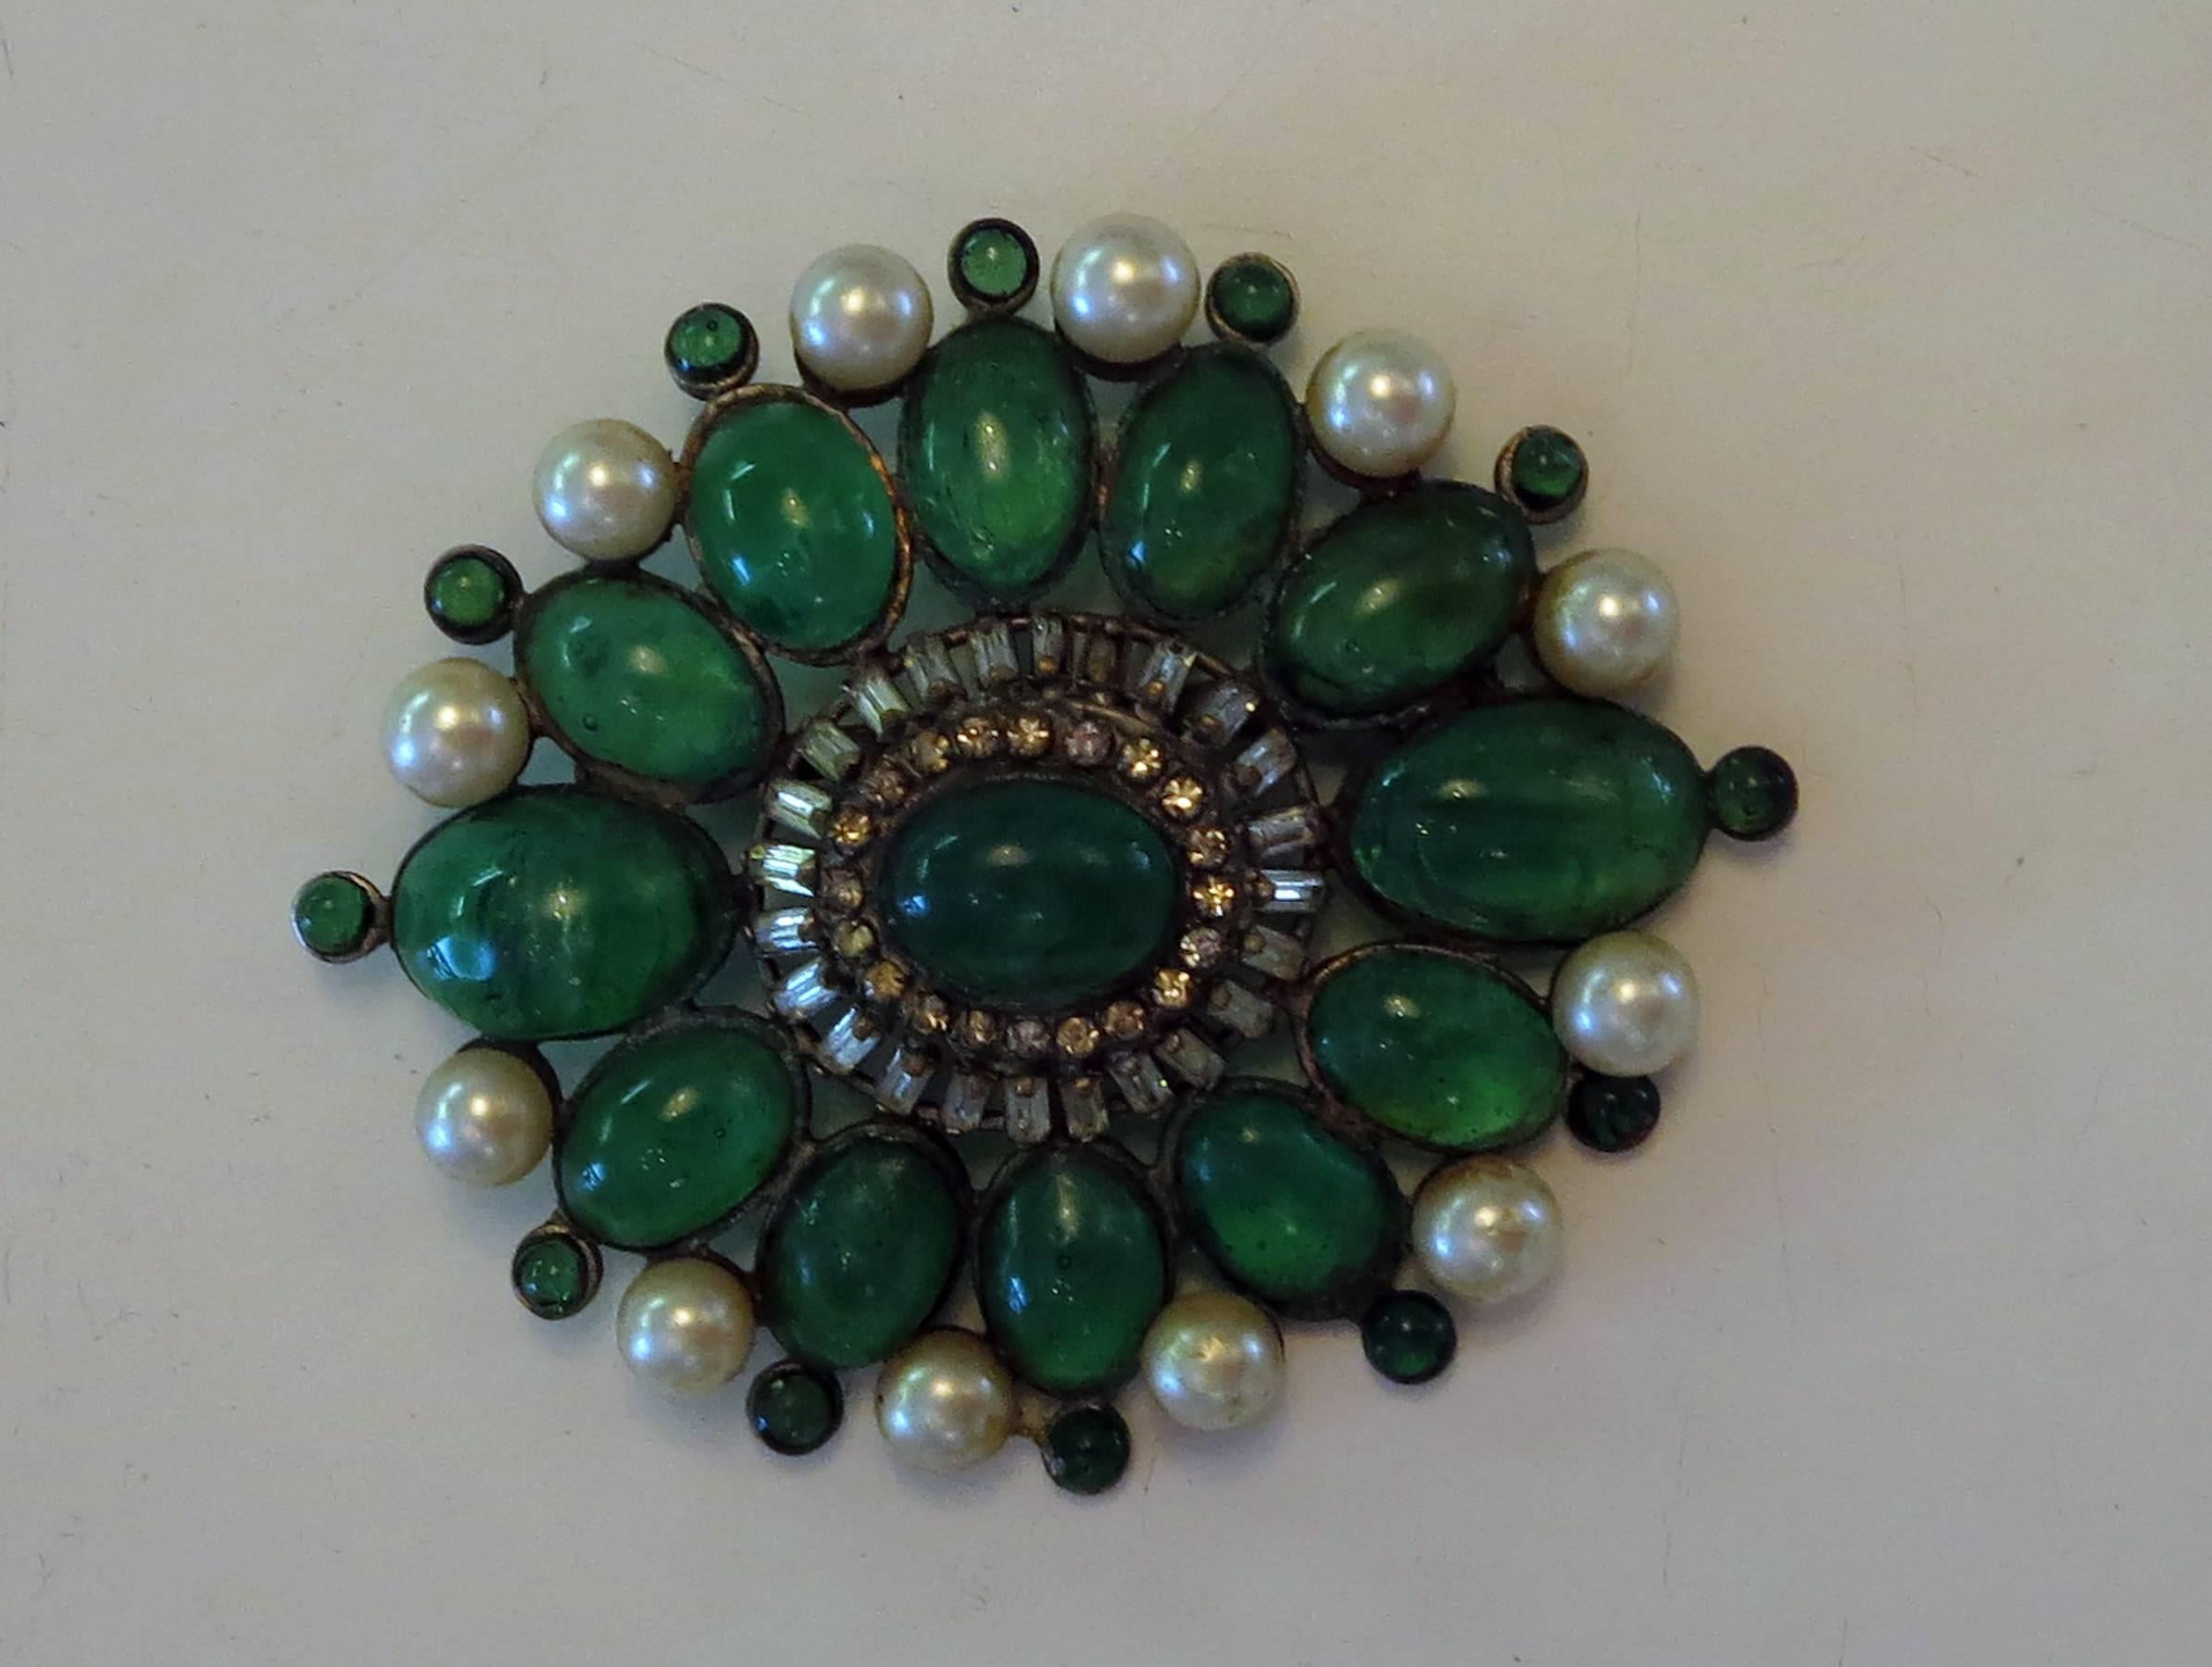 Baroque Revival Chanel rare early signed large Gripoix emerald brooch 1950s